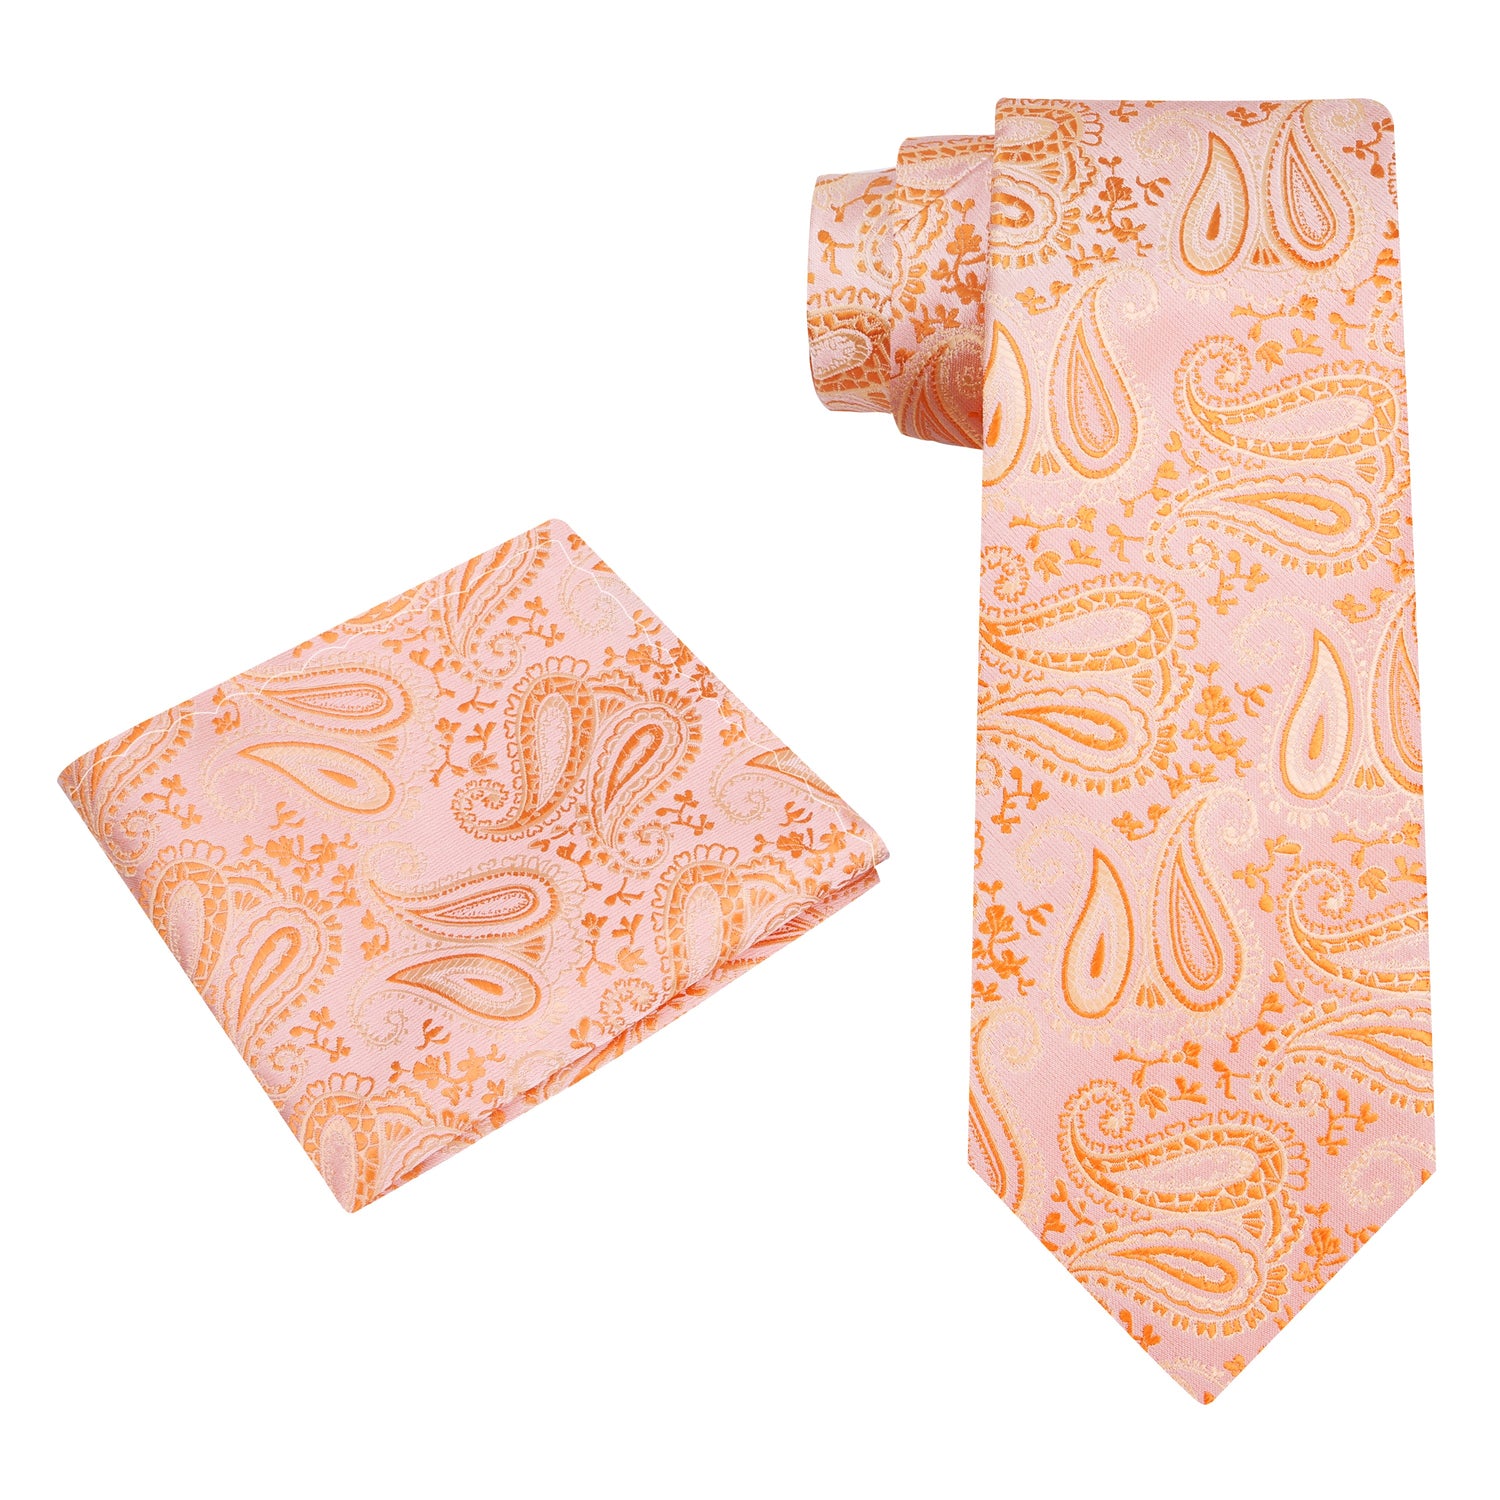 Alt View: A Cheerful Coral Paisley Pattern Silk Necktie, Matching Pocket Square